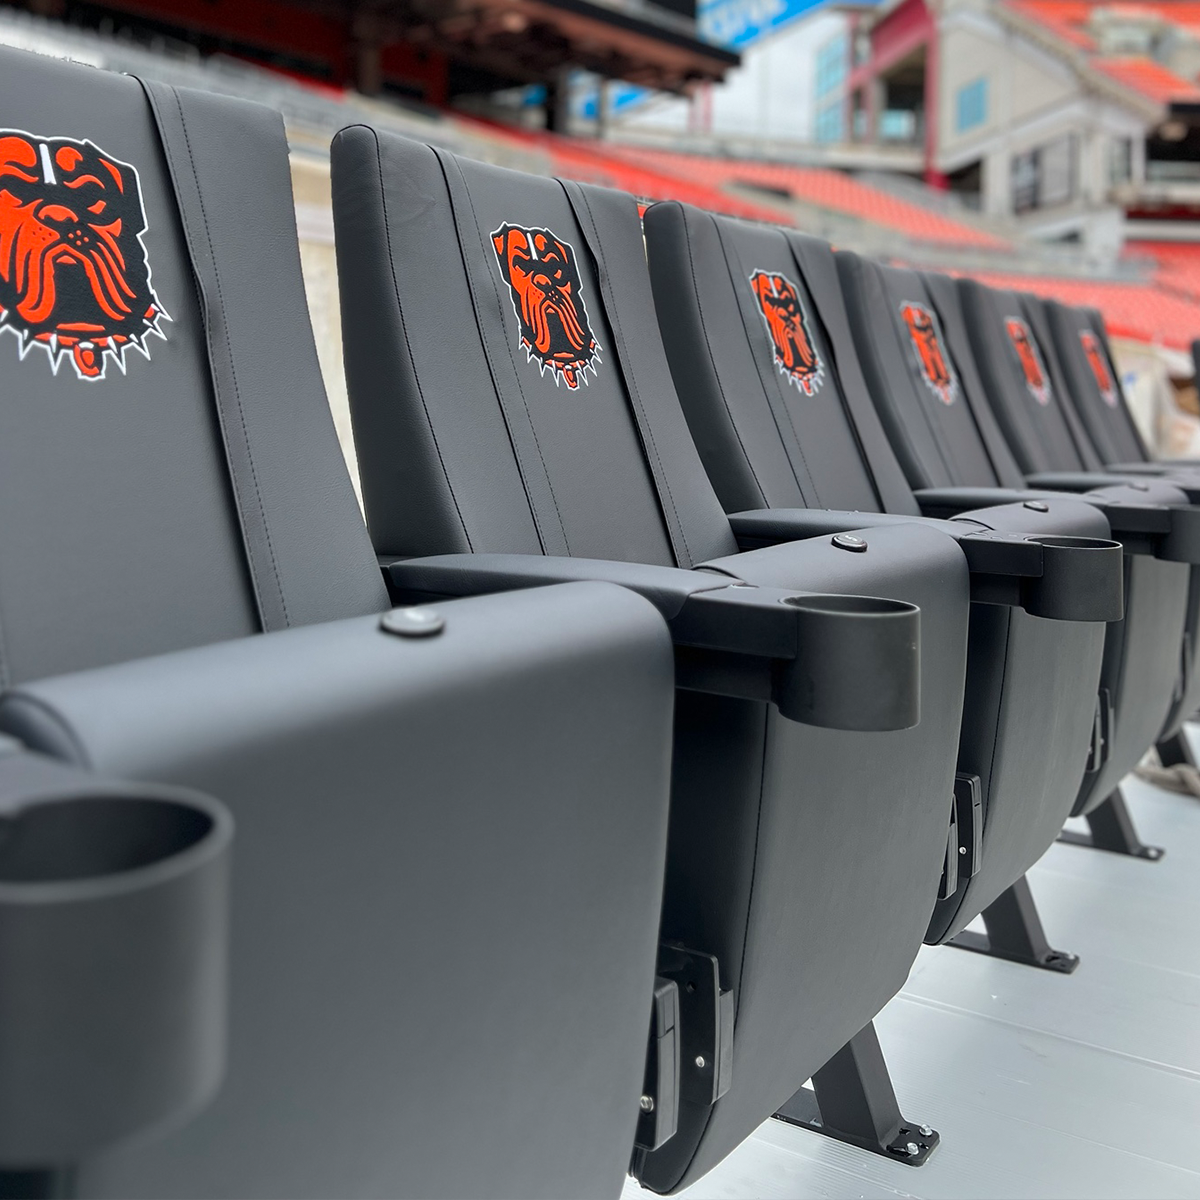 SuiteMax 3.5 VIP Seats with San Diego Padres Primary Logo